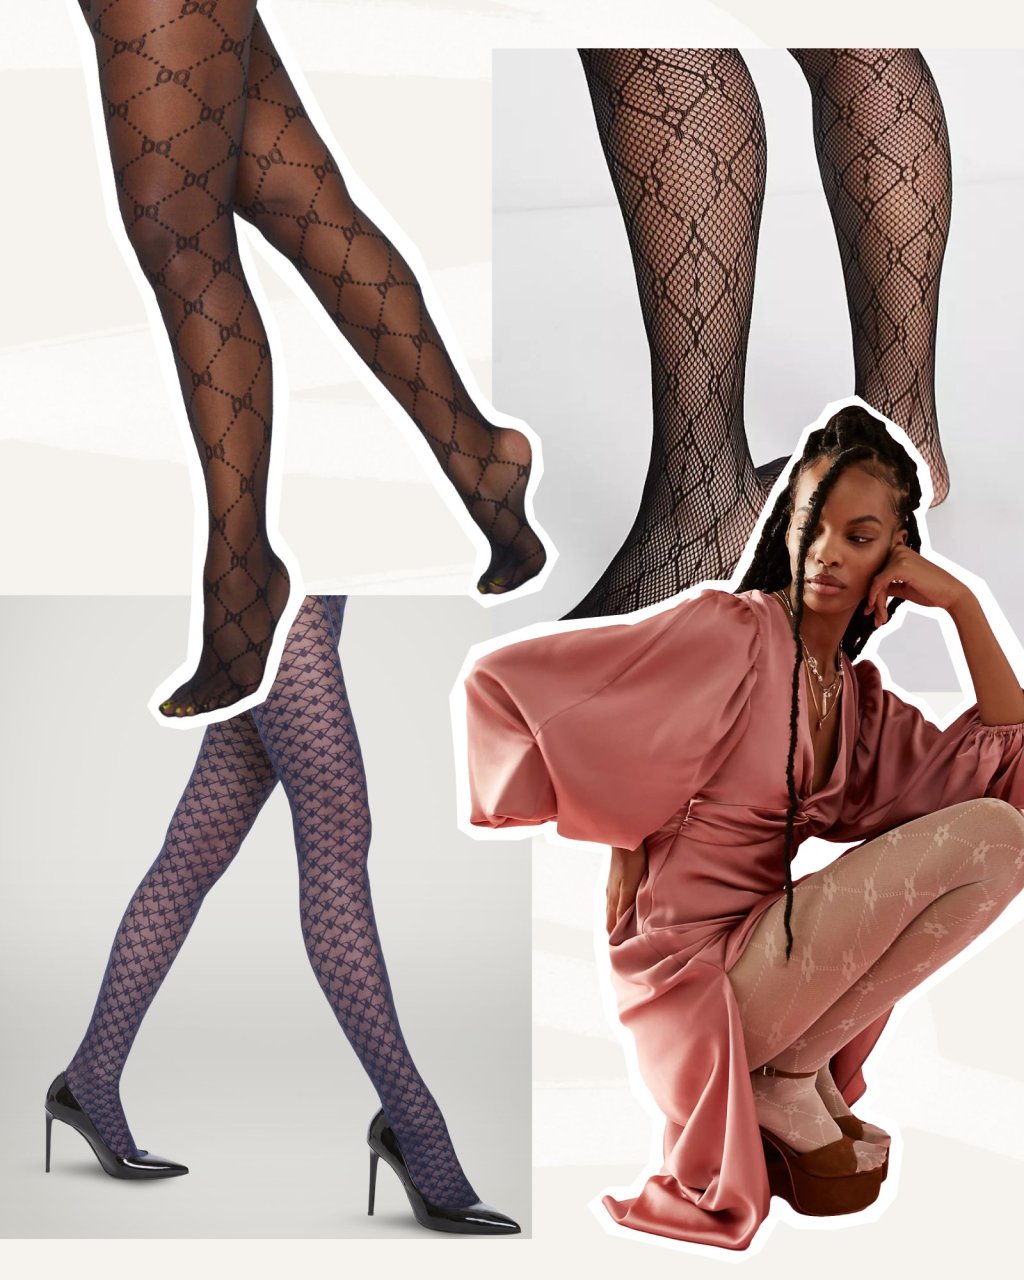 Trending: GG Pattern Tights  Patterned tights, Tights, Fashion tights